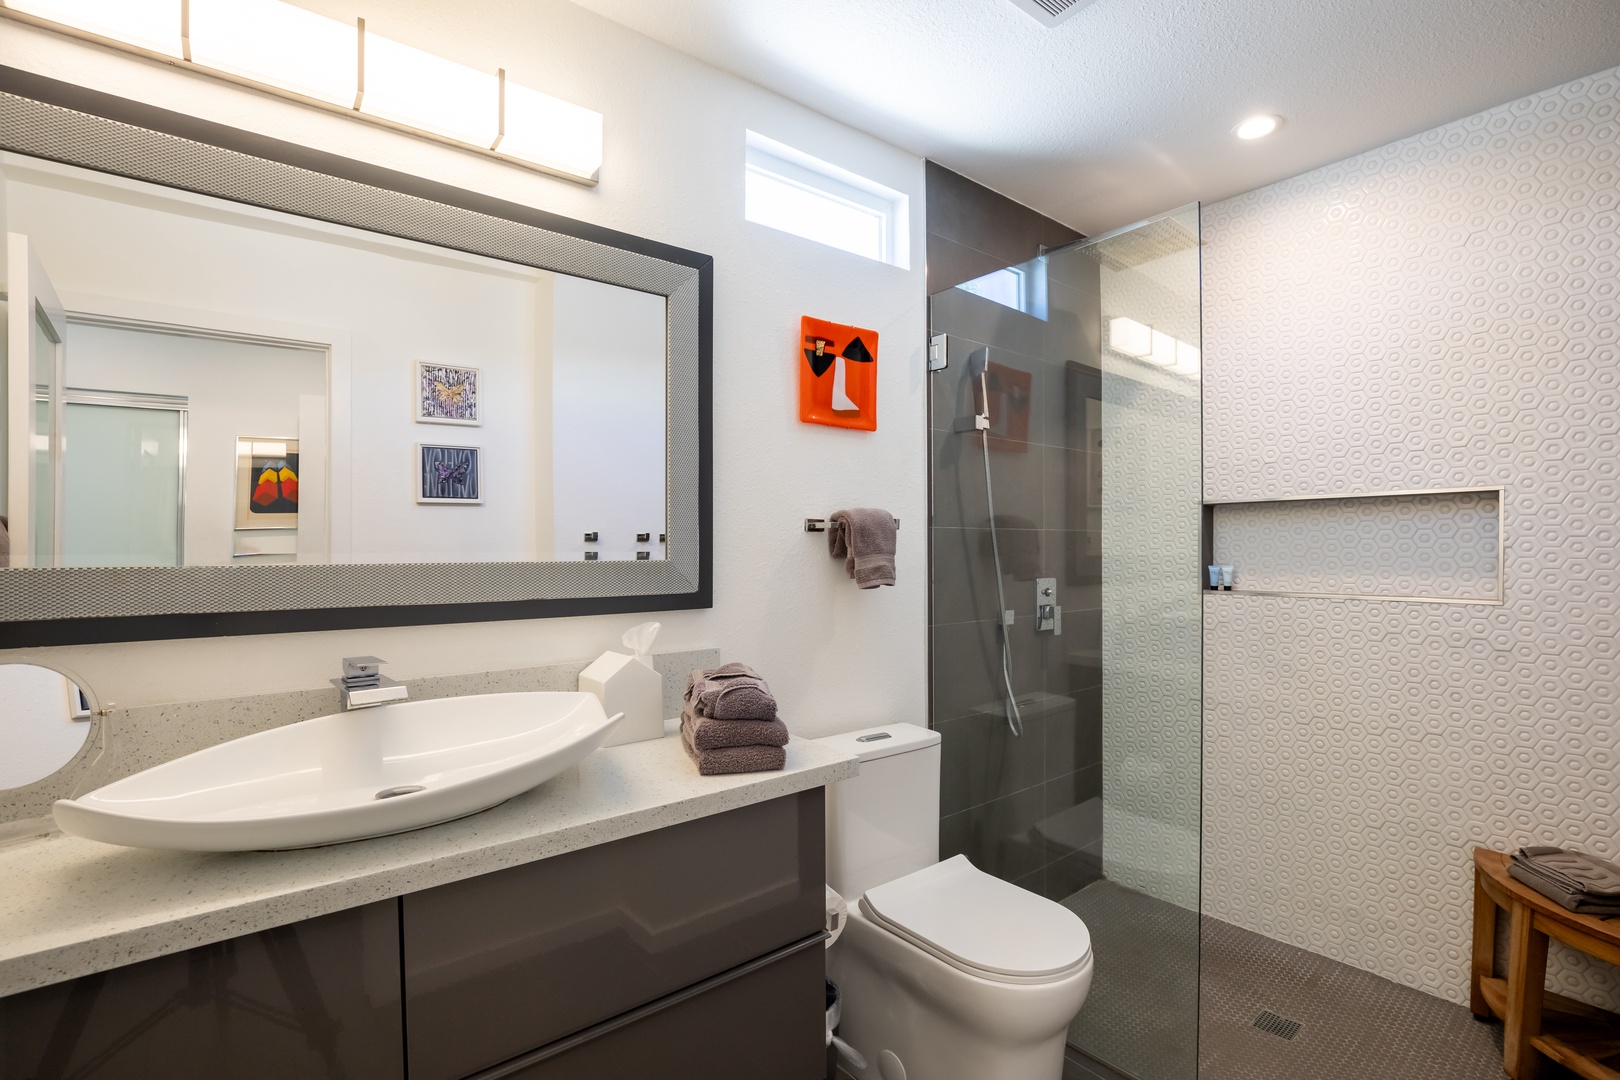 The polished primary king en suite boasts an oversized vanity & spa-like rain shower